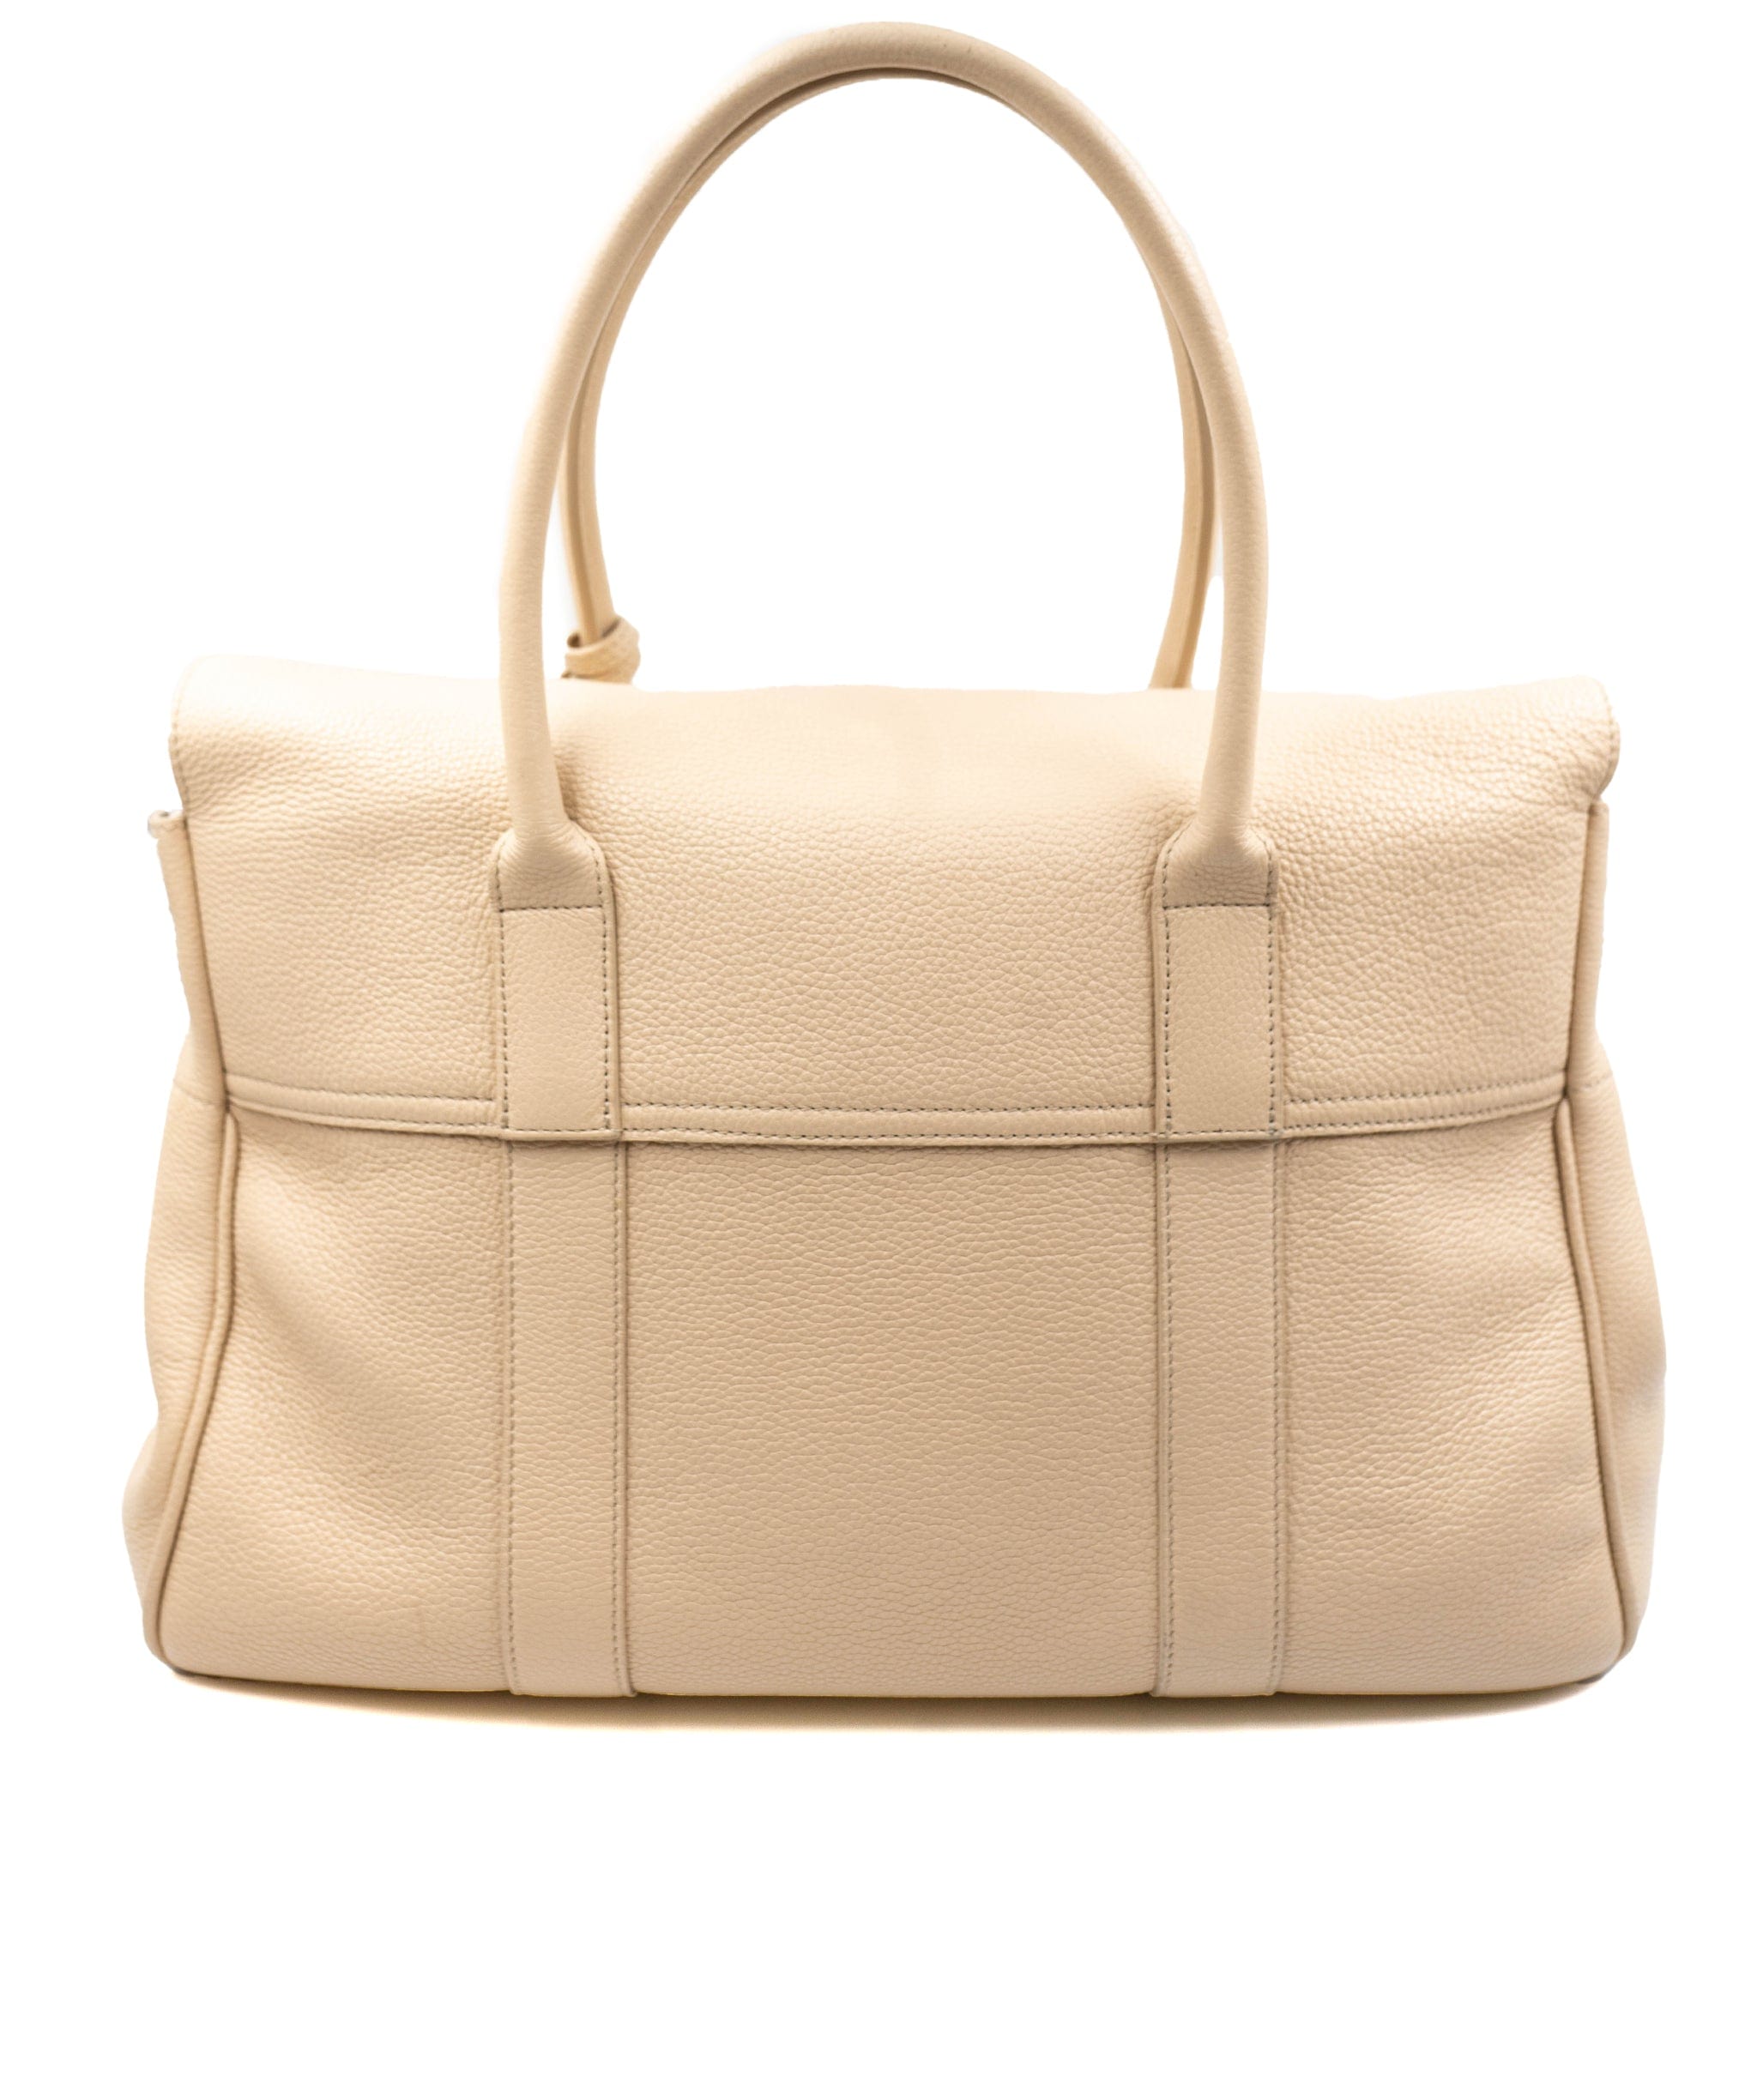 Mulberry Mulberry beige bayswater bag  AGL2331